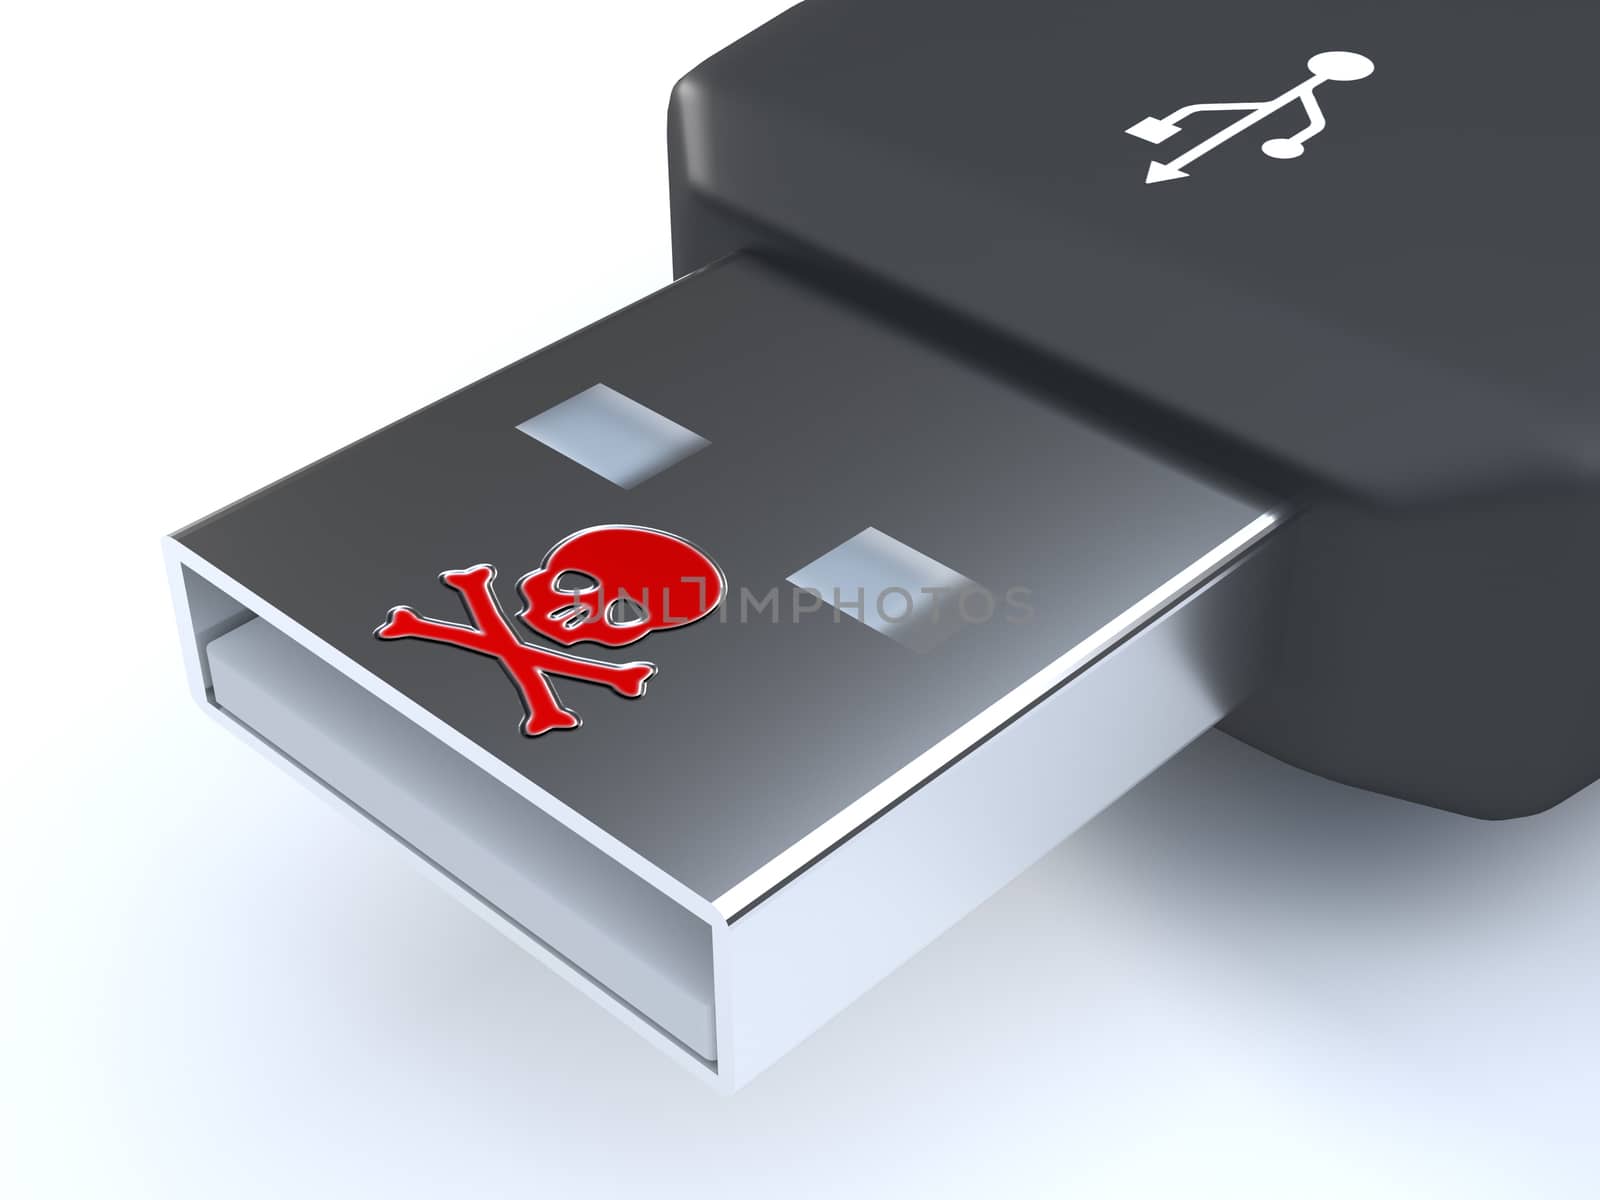 USB malware - An USB-stick infected with malware. The stick contains a skull.